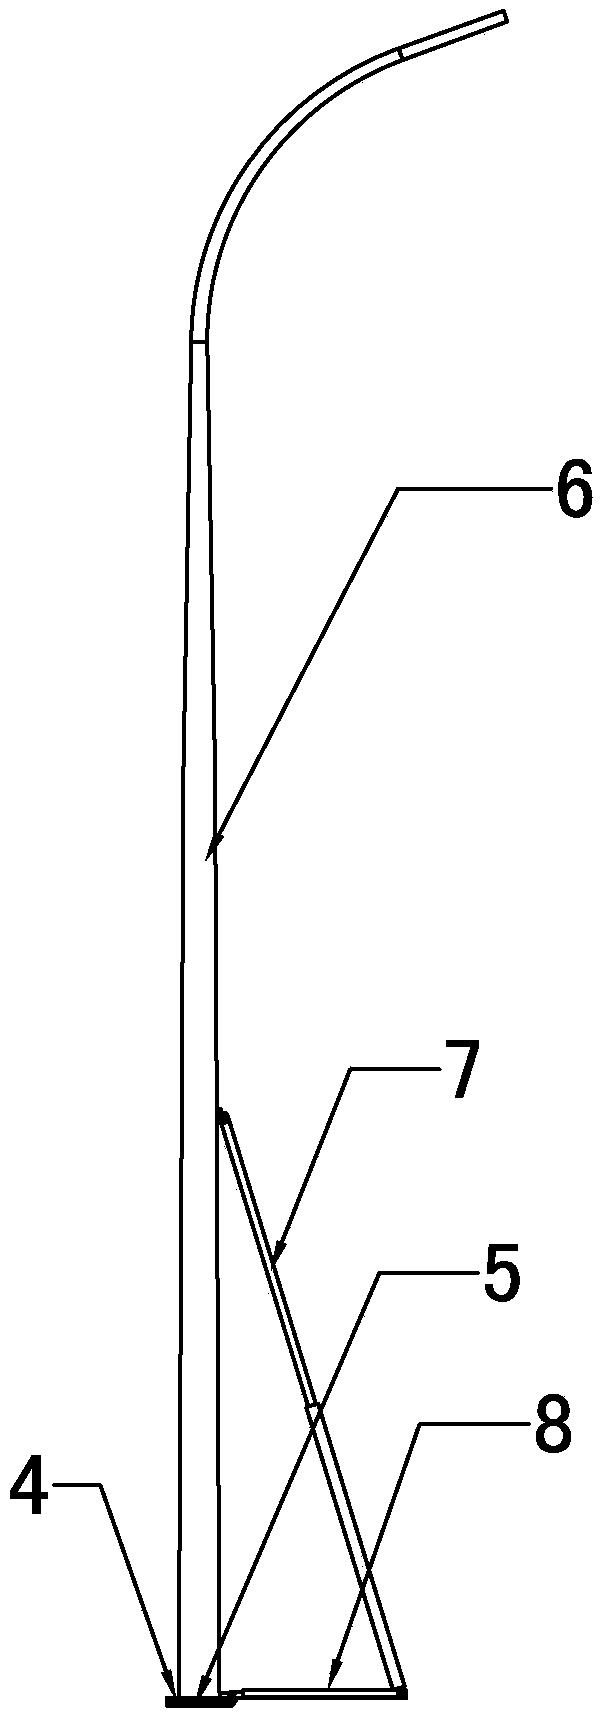 A street lamp loading and unloading device